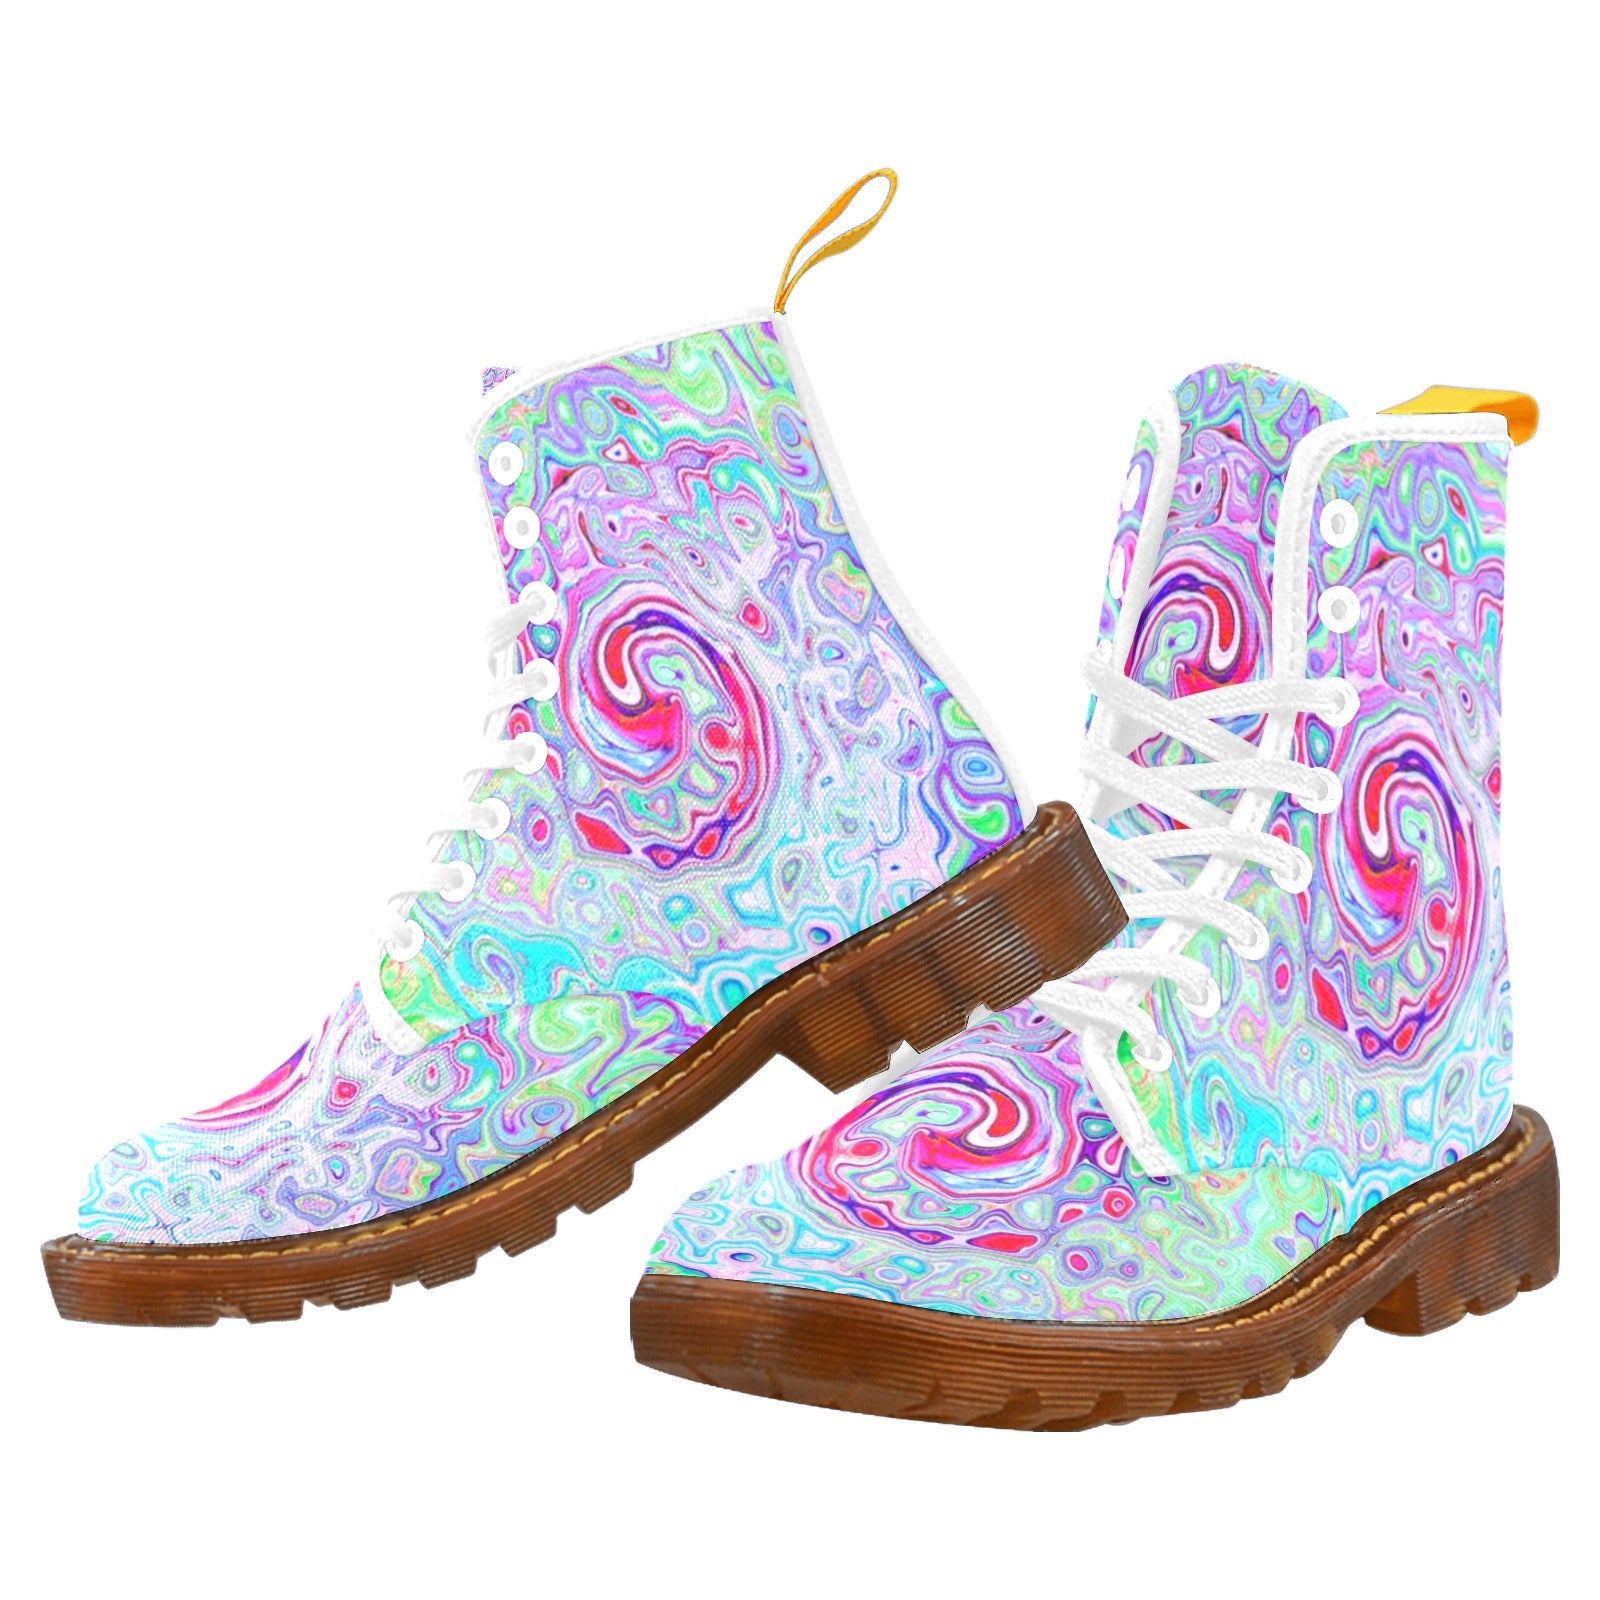 Boots for Women, Groovy Abstract Retro Pink and Green Swirl - White